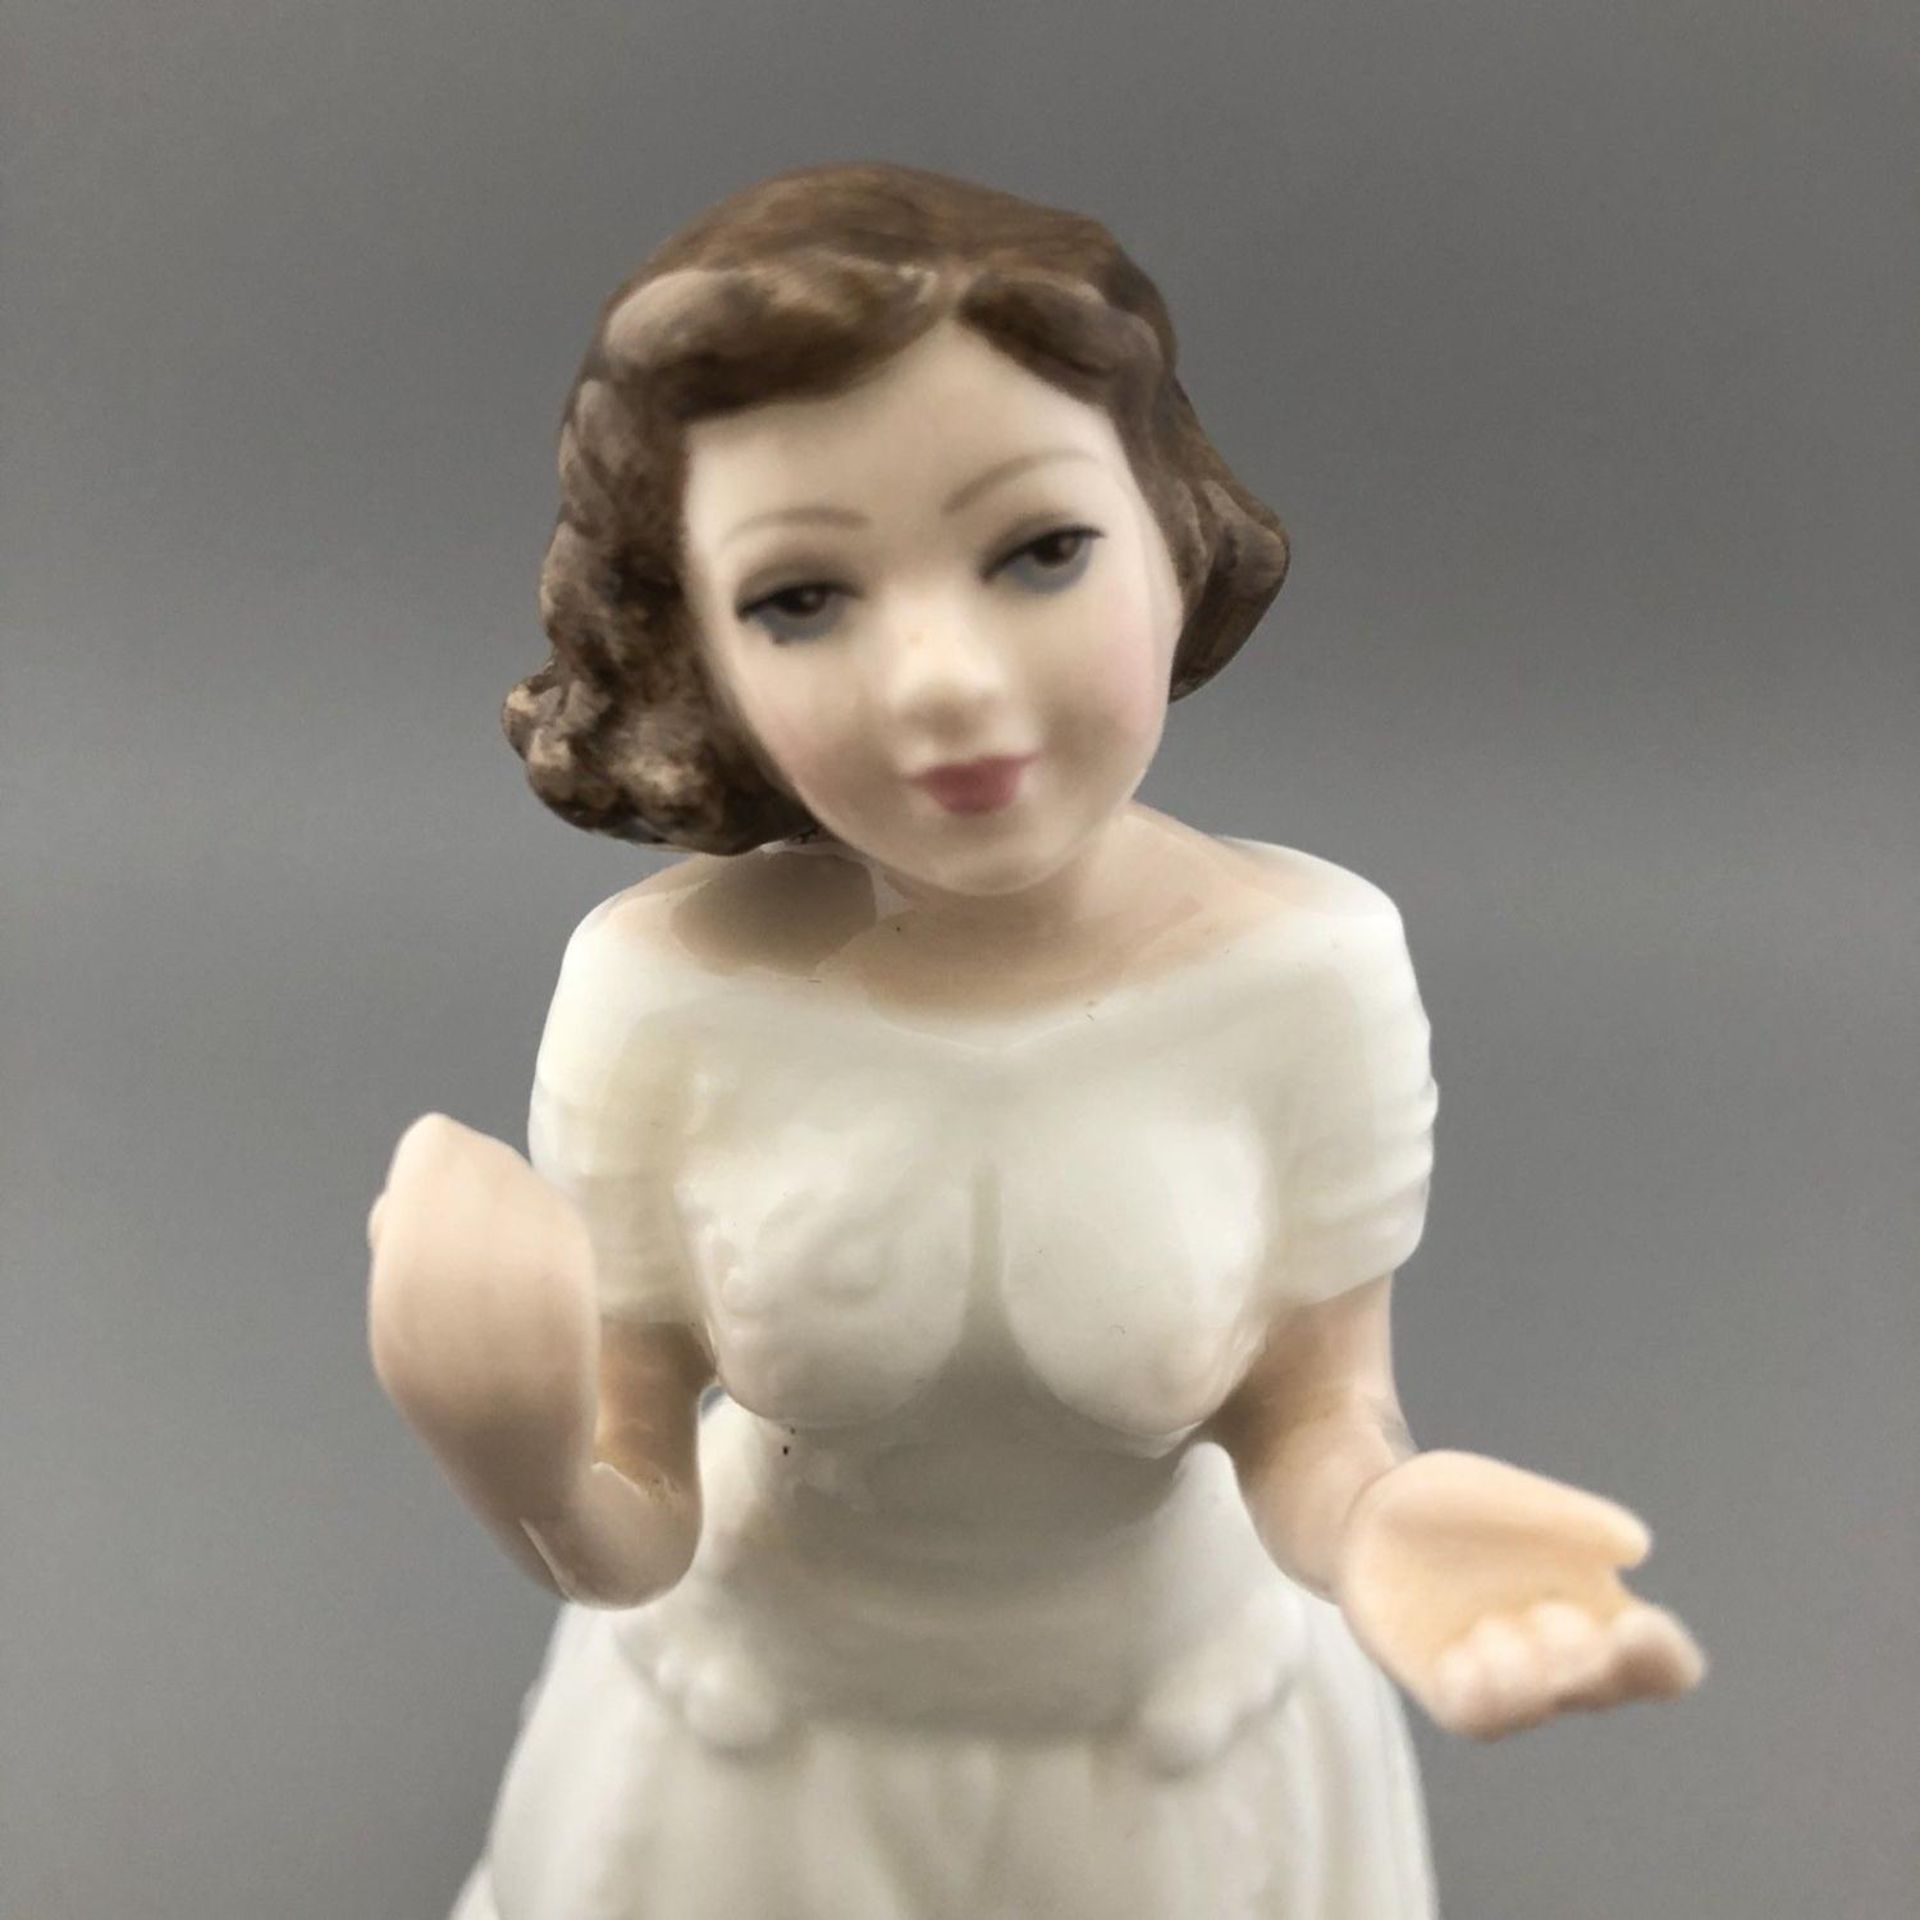 Royal Doulton Figurine "Welcome" Collectors Club HN3764 - Nada M Pedley 1995 - Image 2 of 6